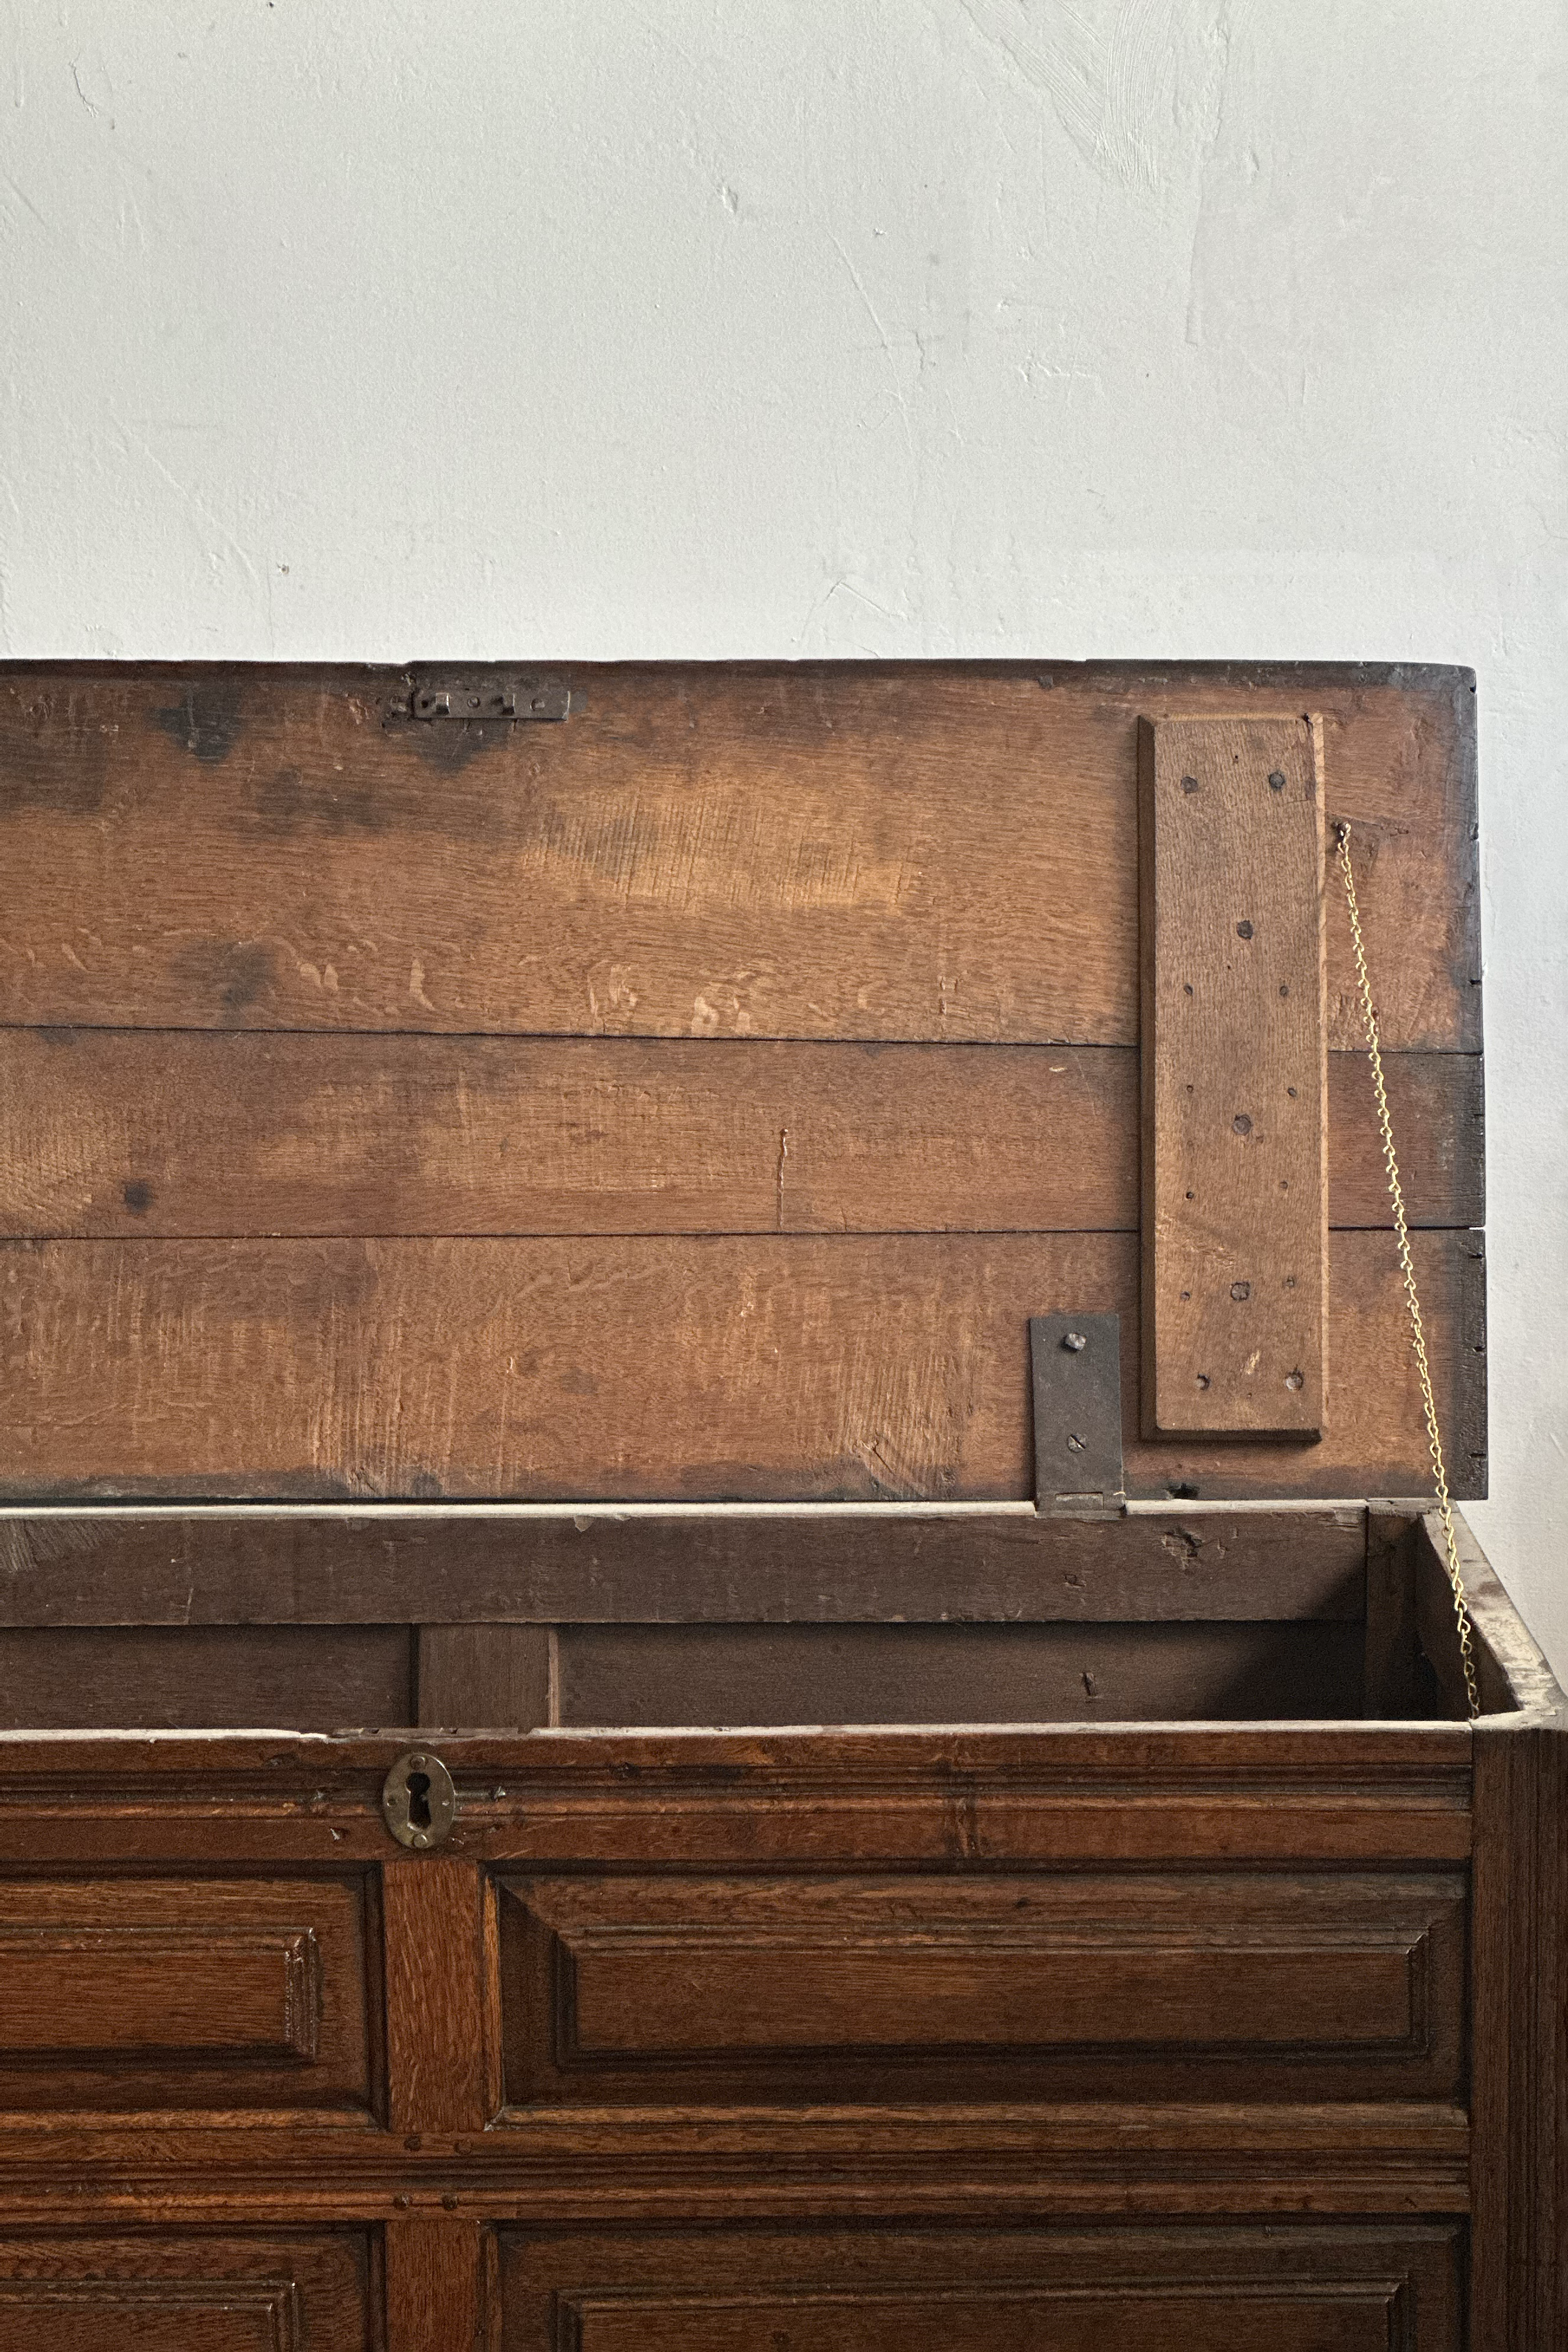 Antique English Georgian Oak Blanket Chest With Drawer